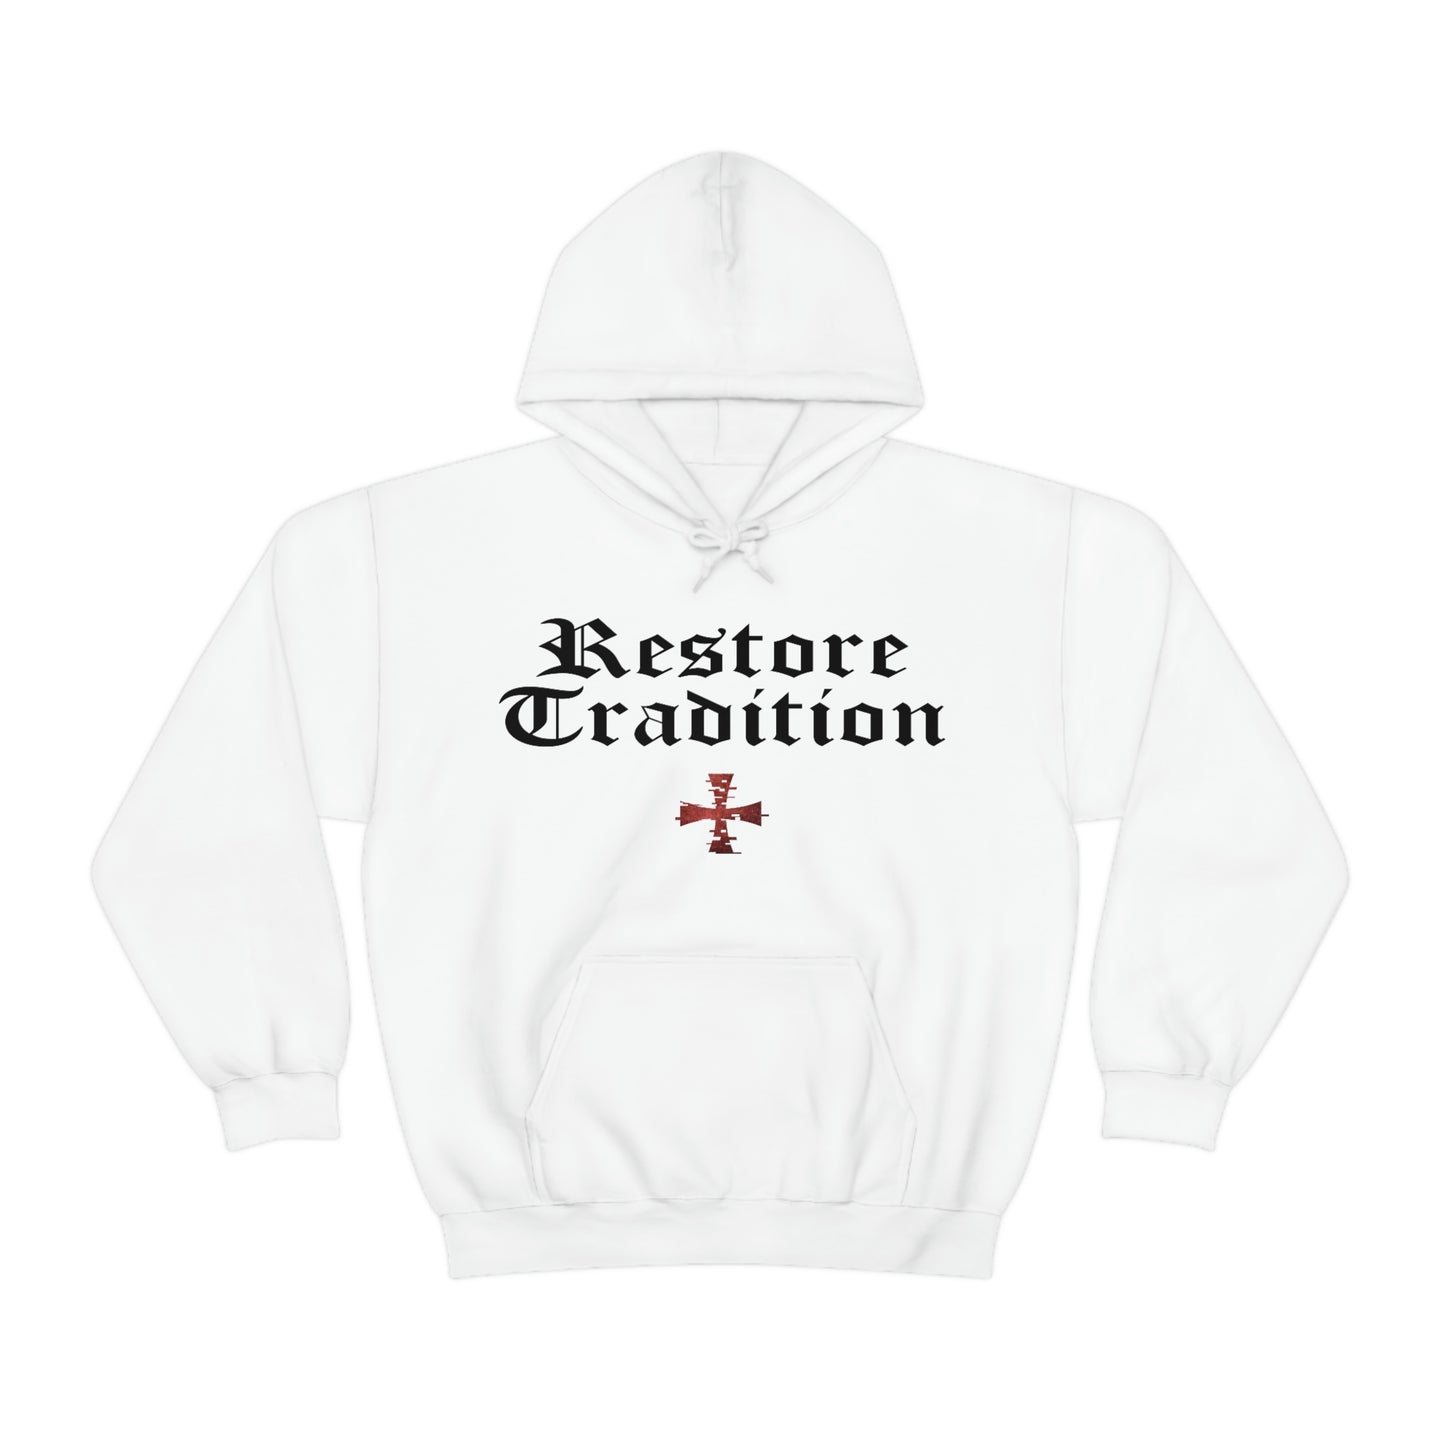 White Gildan hoodie with "Restore Tradition" and a red digital crusader Sanctus Servo logo printed on it.